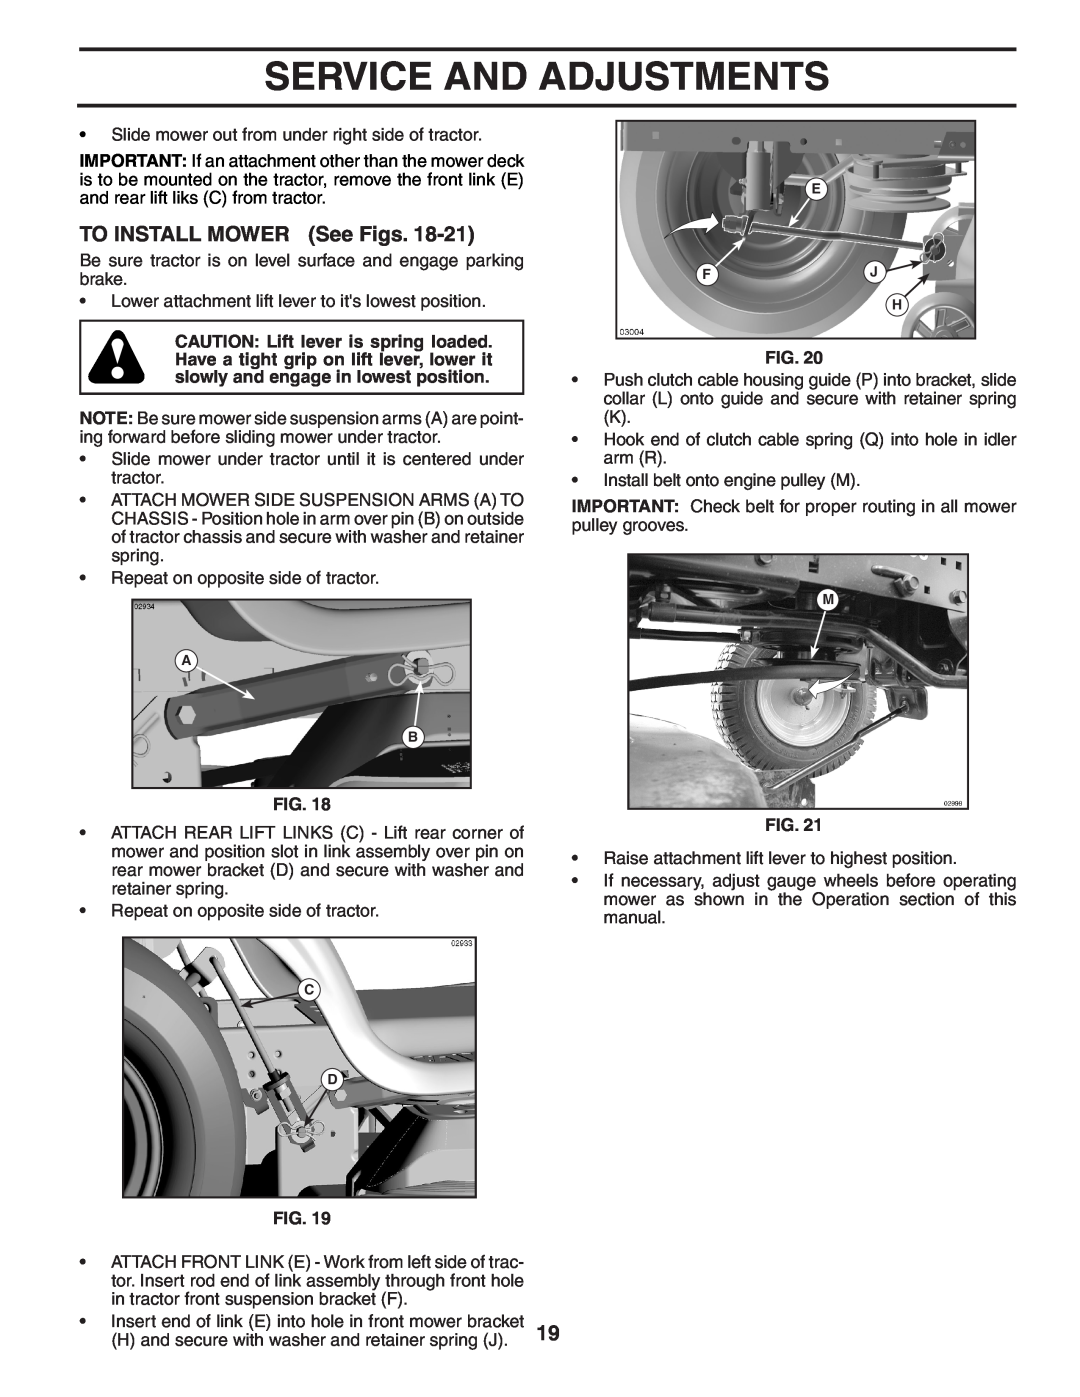 Poulan PB20H42YT manual TO INSTALL MOWER See Figs, Service And Adjustments 